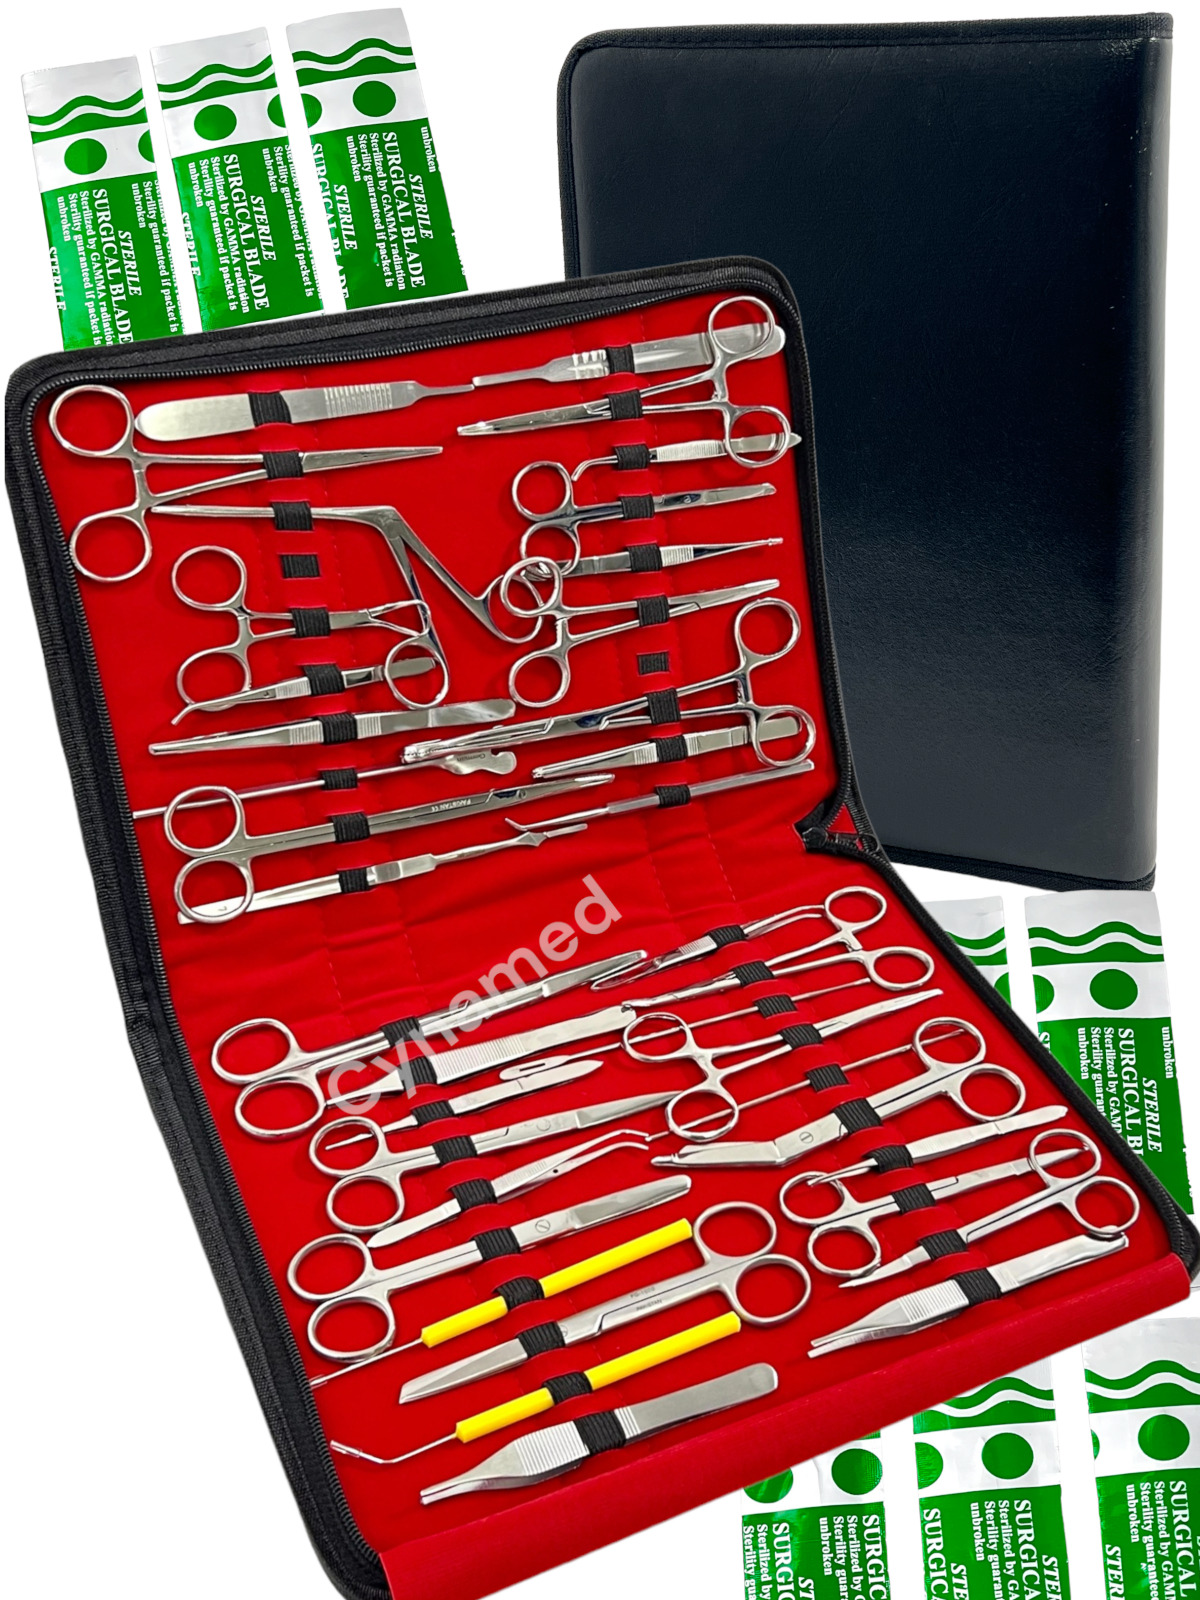 NEW PREMIUM 157 PC MINOR SURGERY SUTURE SET SURGICAL INSTRUMENTS KIT-ALL IN ONE 